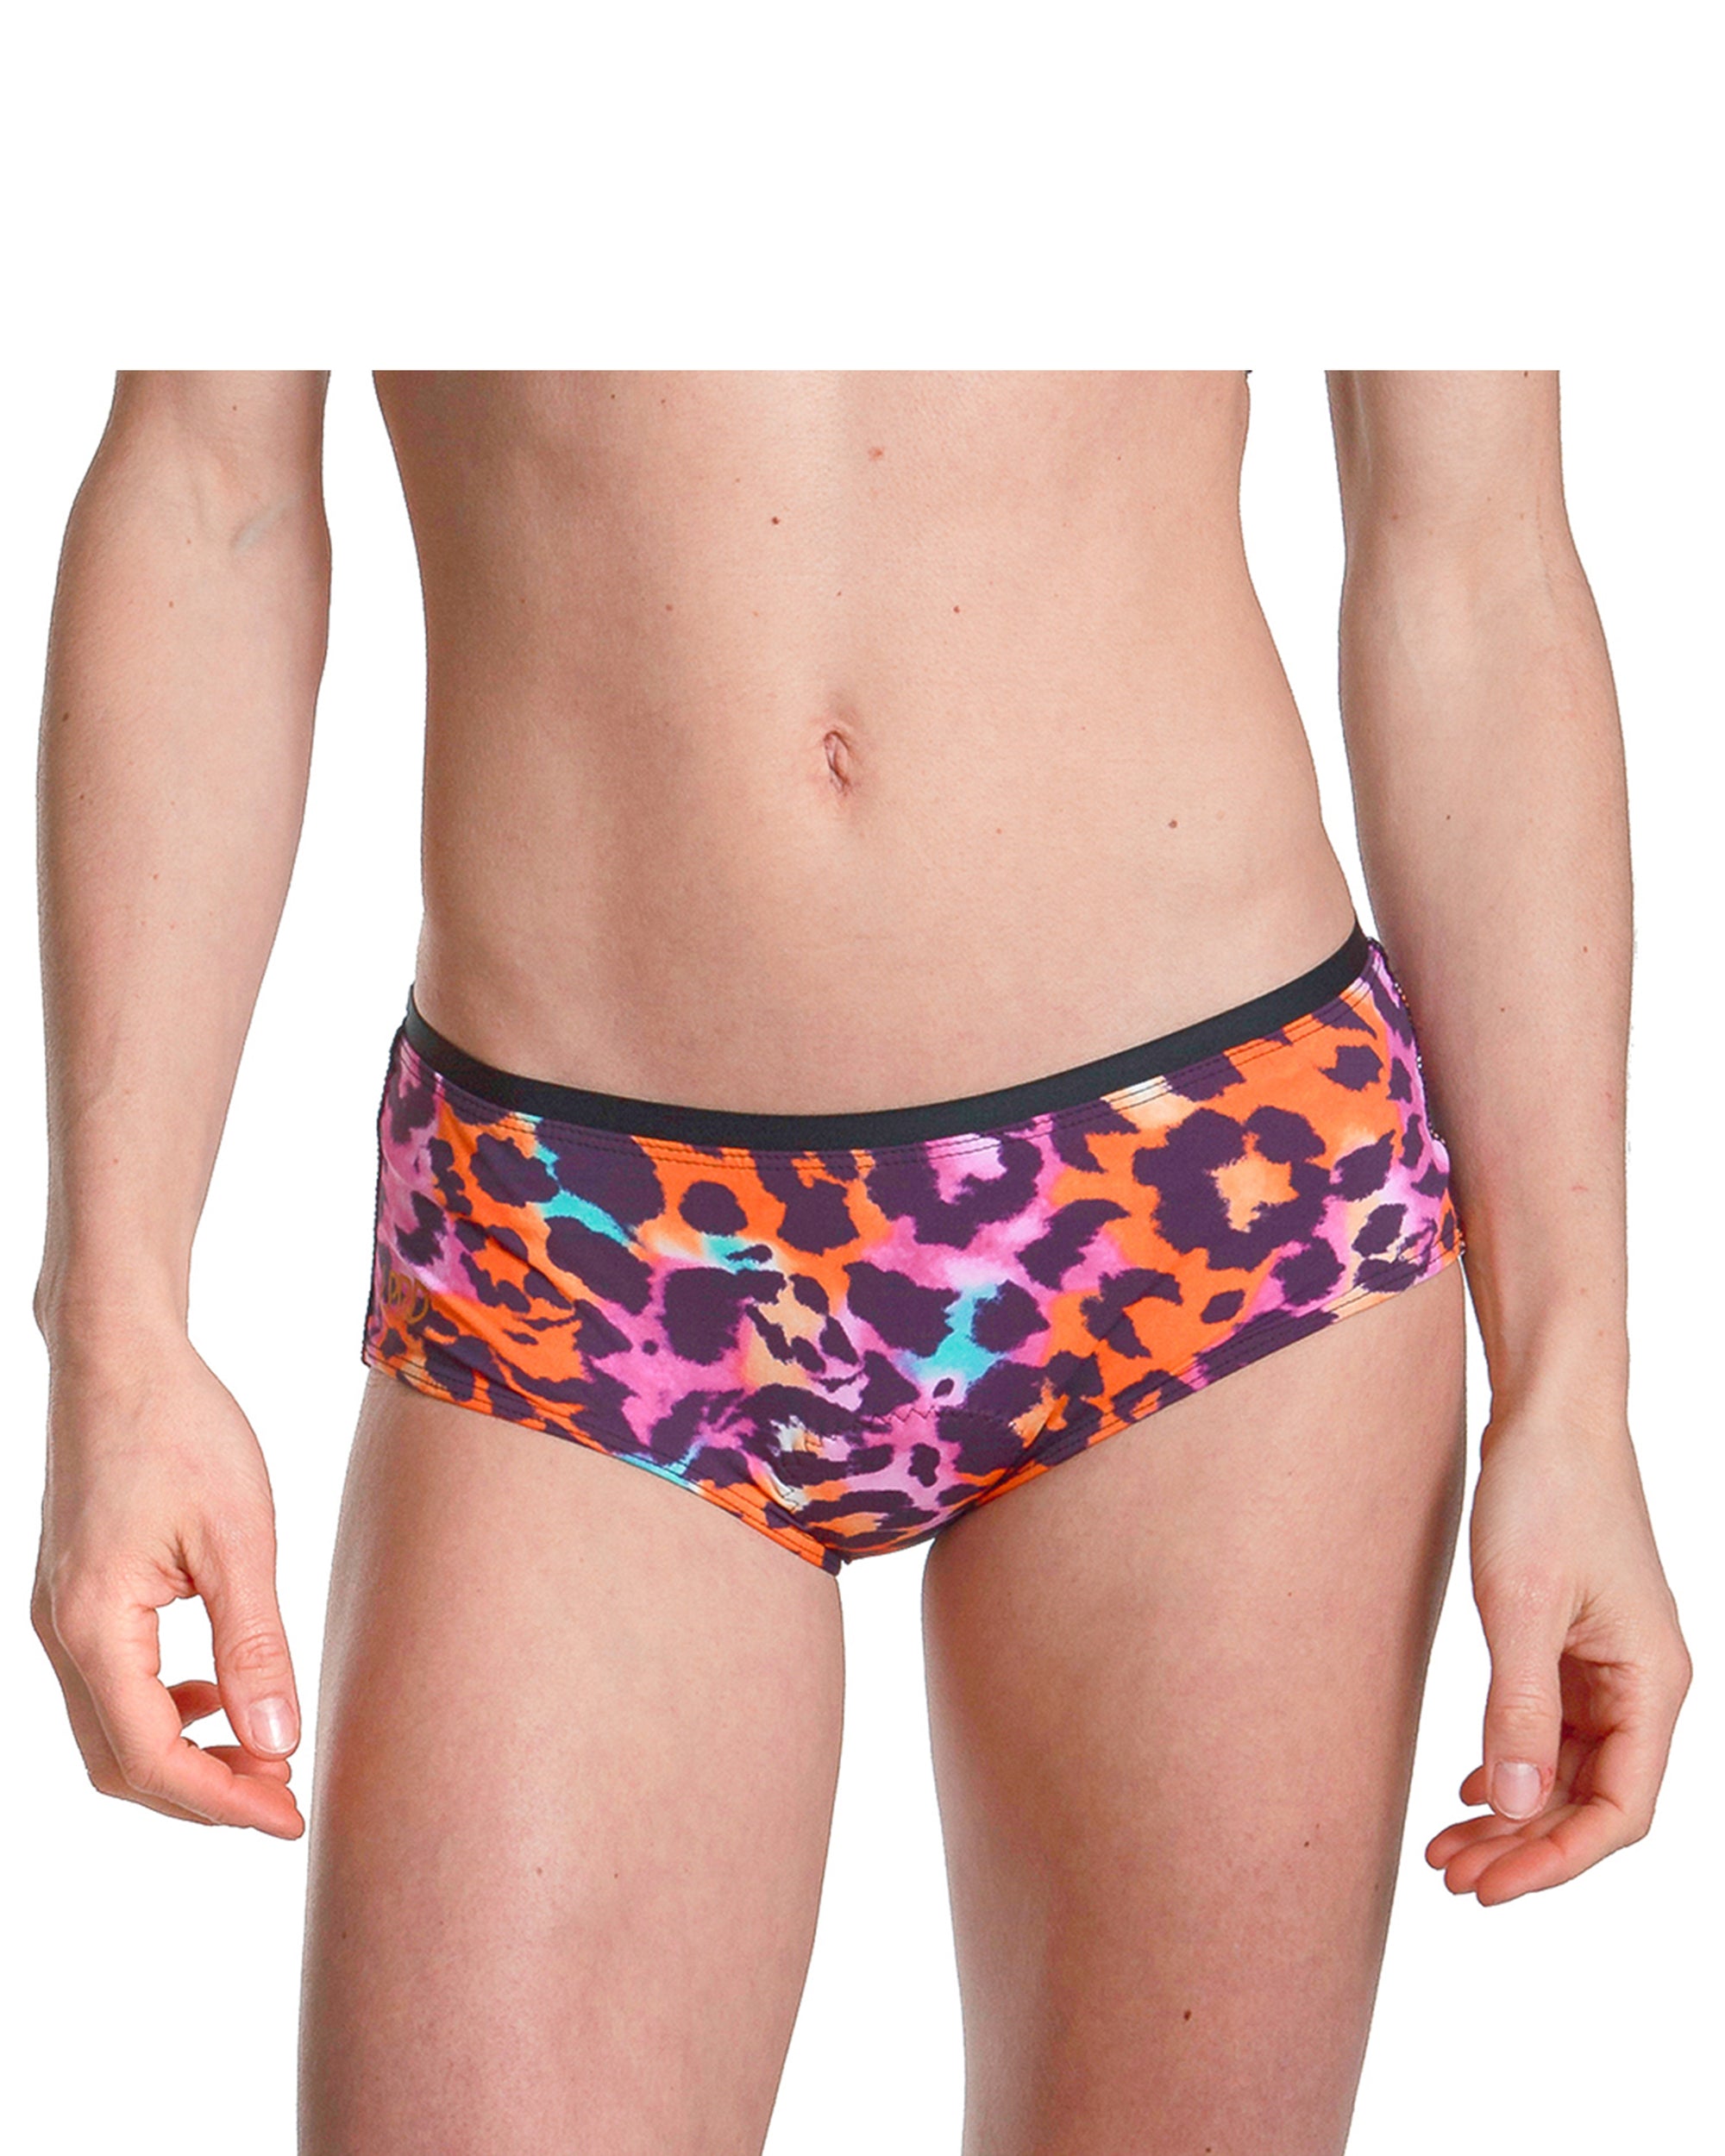 Ladies padded cycling underwear - Pink leopard print - Colourful briefs  with padding for extra comfort on your bicycle or for spinning classes -  LPRD